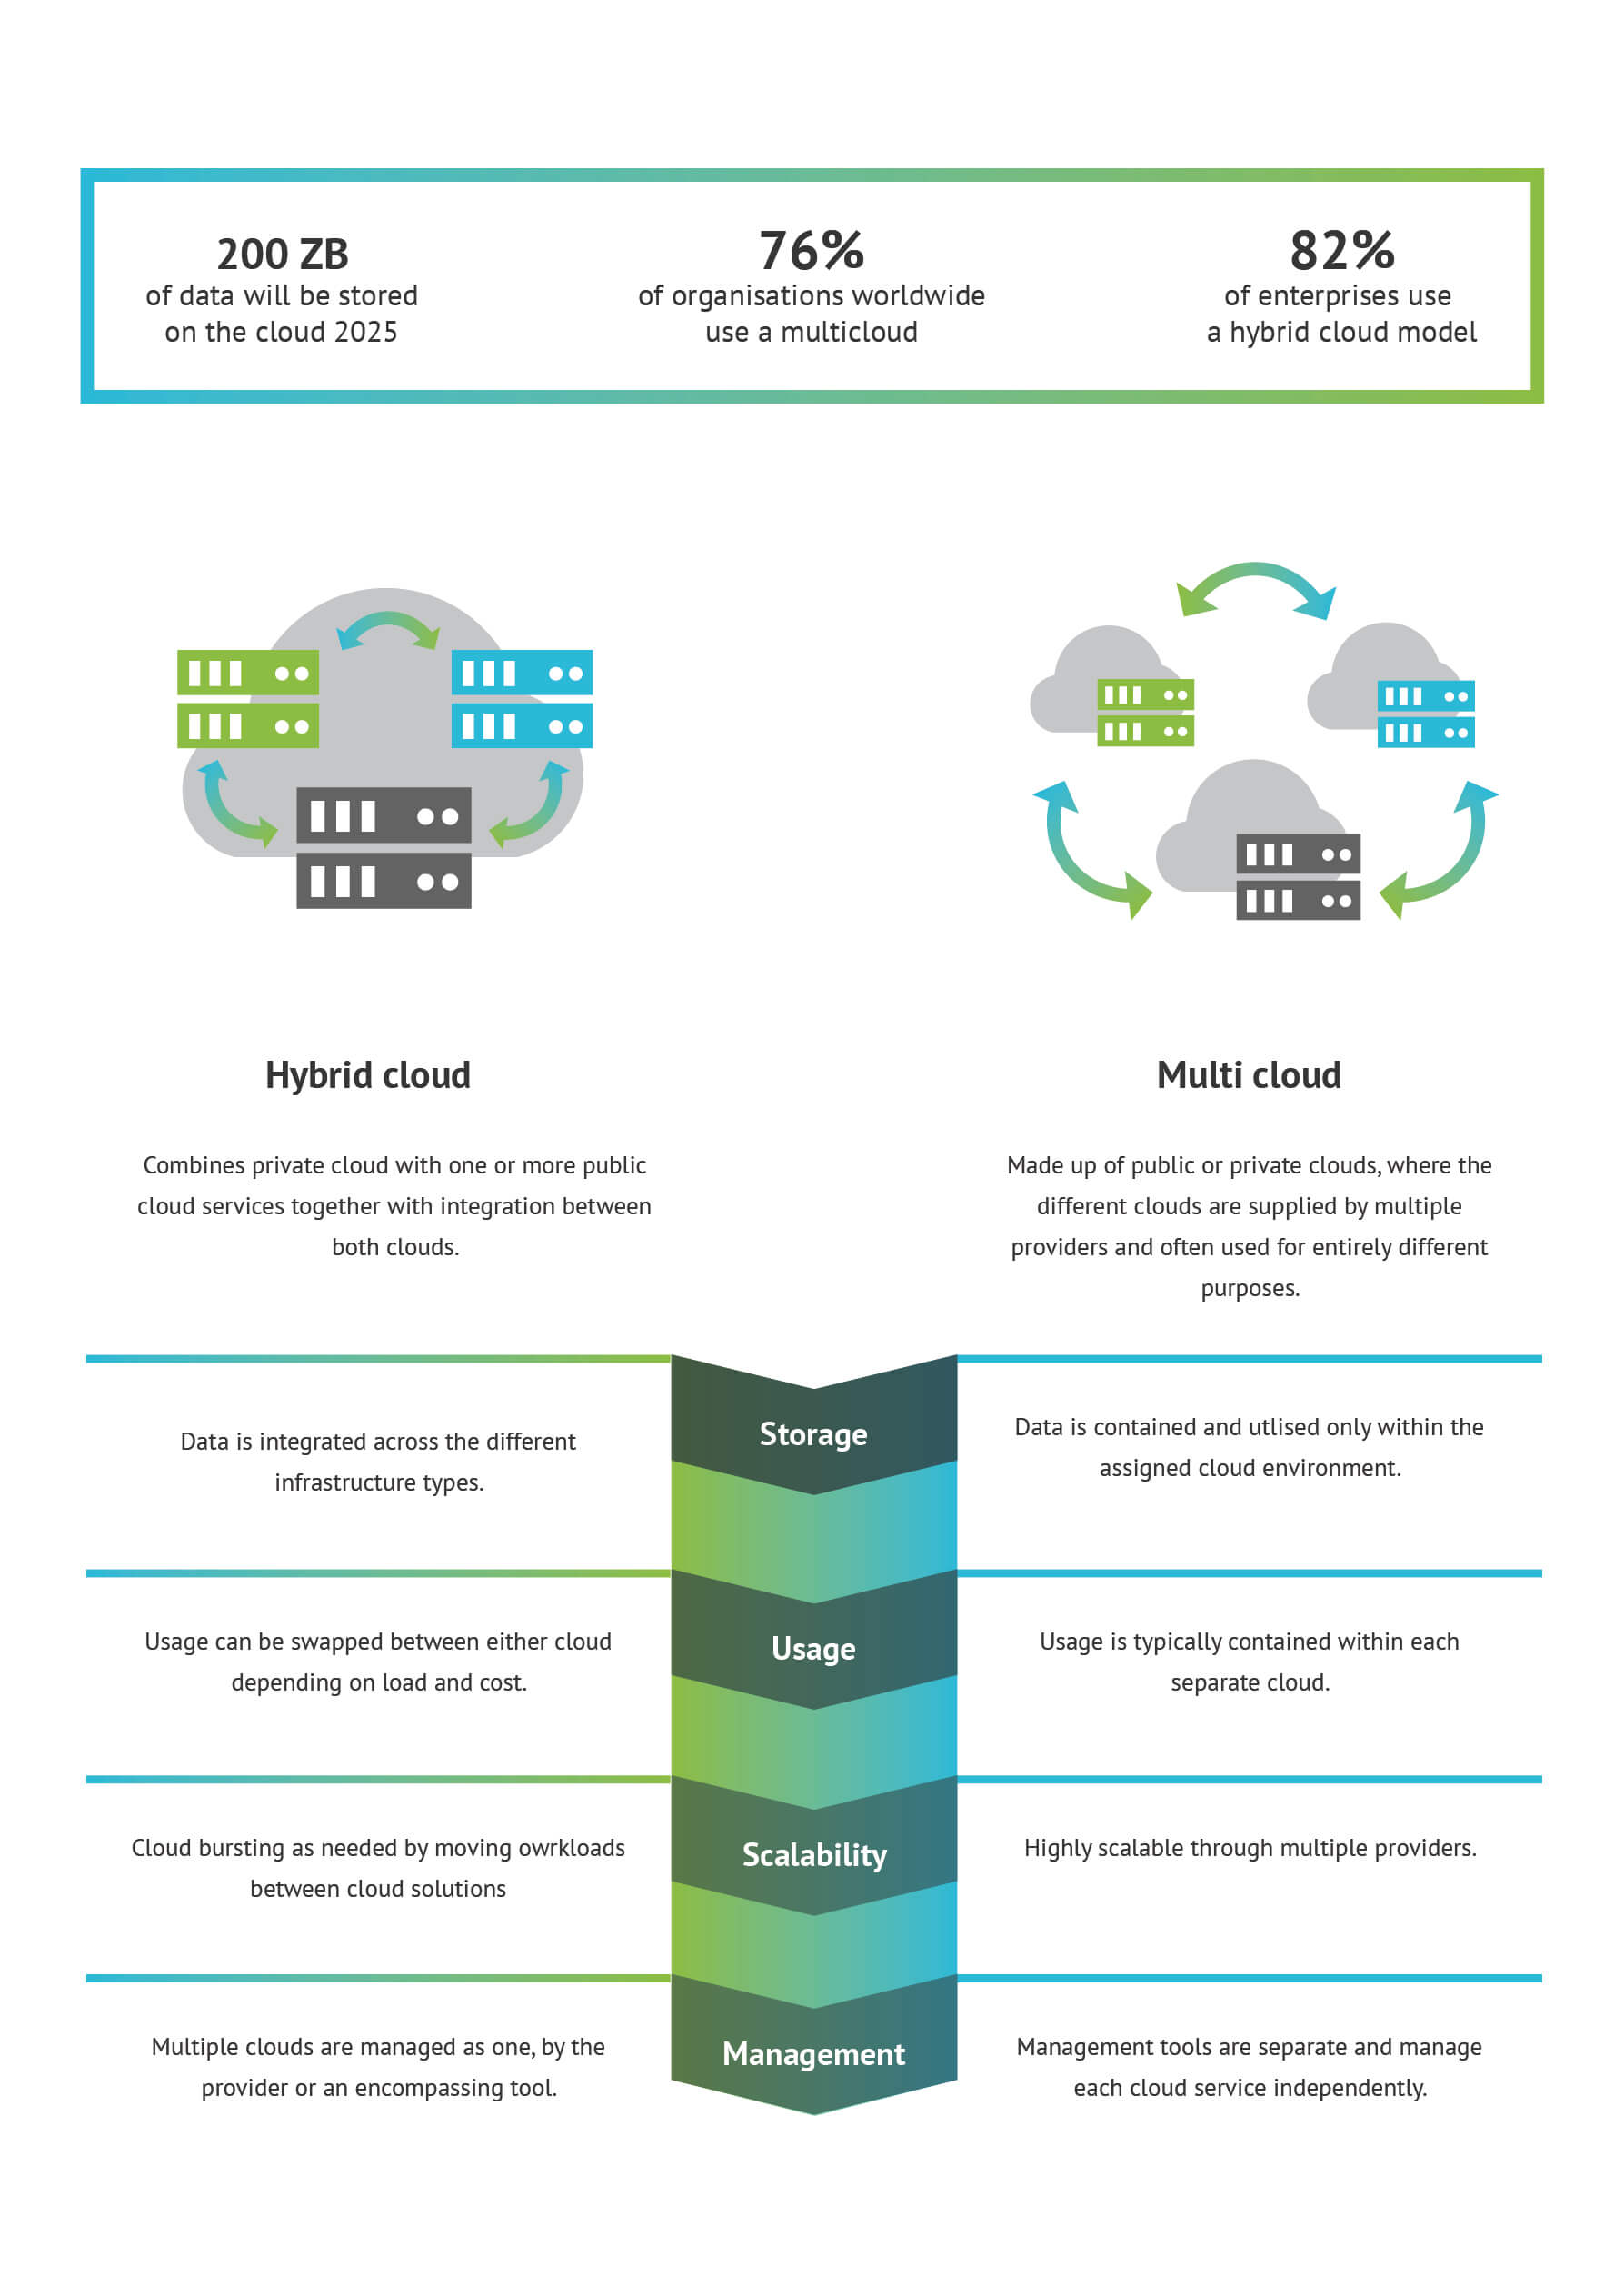 Infographic explaining the difference between hybrid cloud and multi cloud, with differences split into four sections: storage, usage, scalability and management